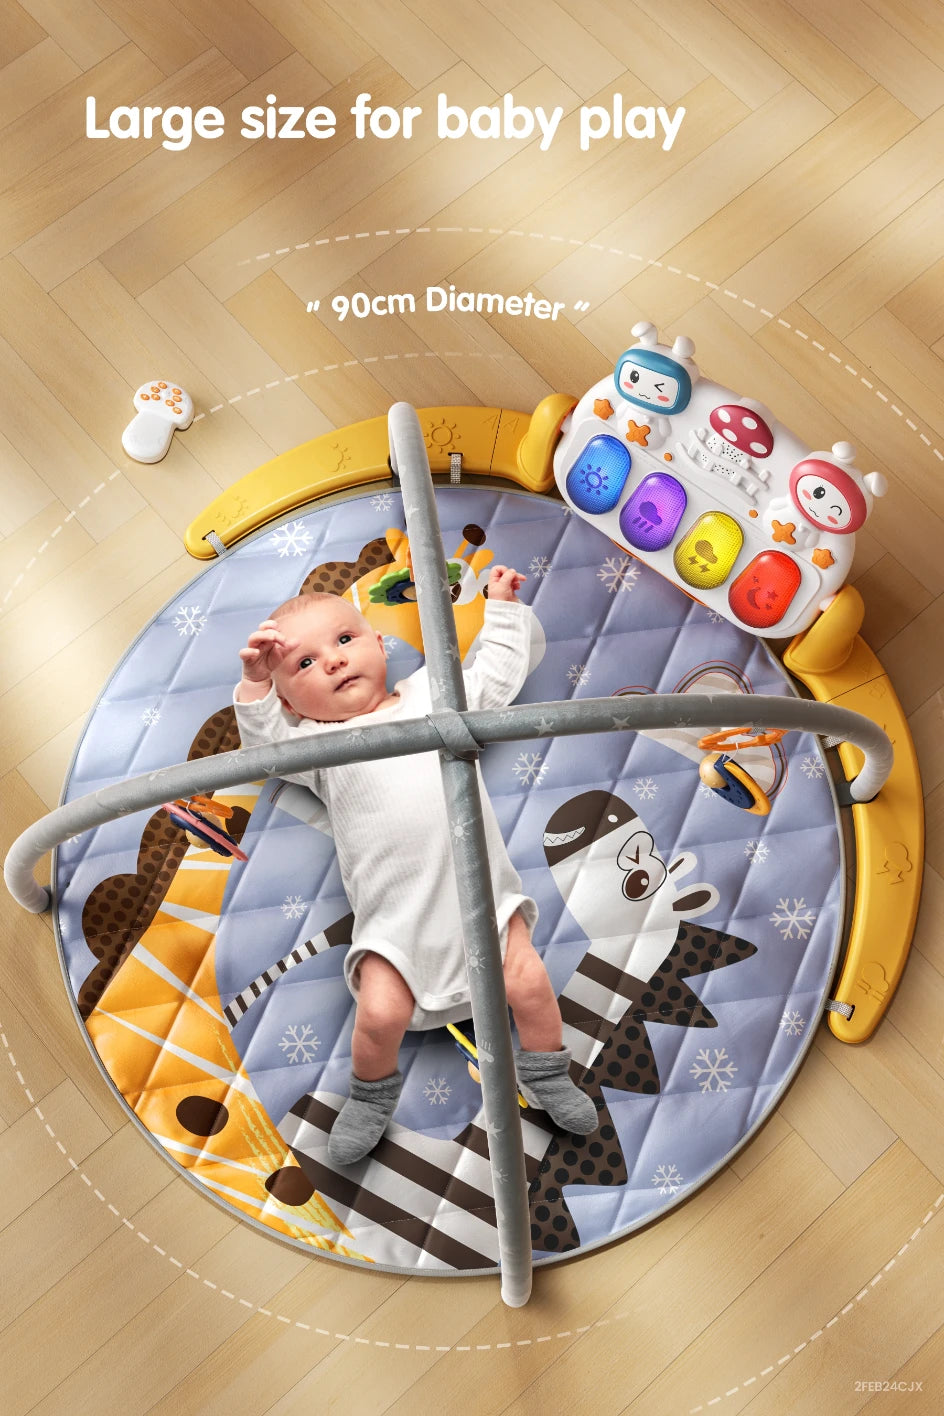 Kick play toy on Bluetooth enabled baby mat